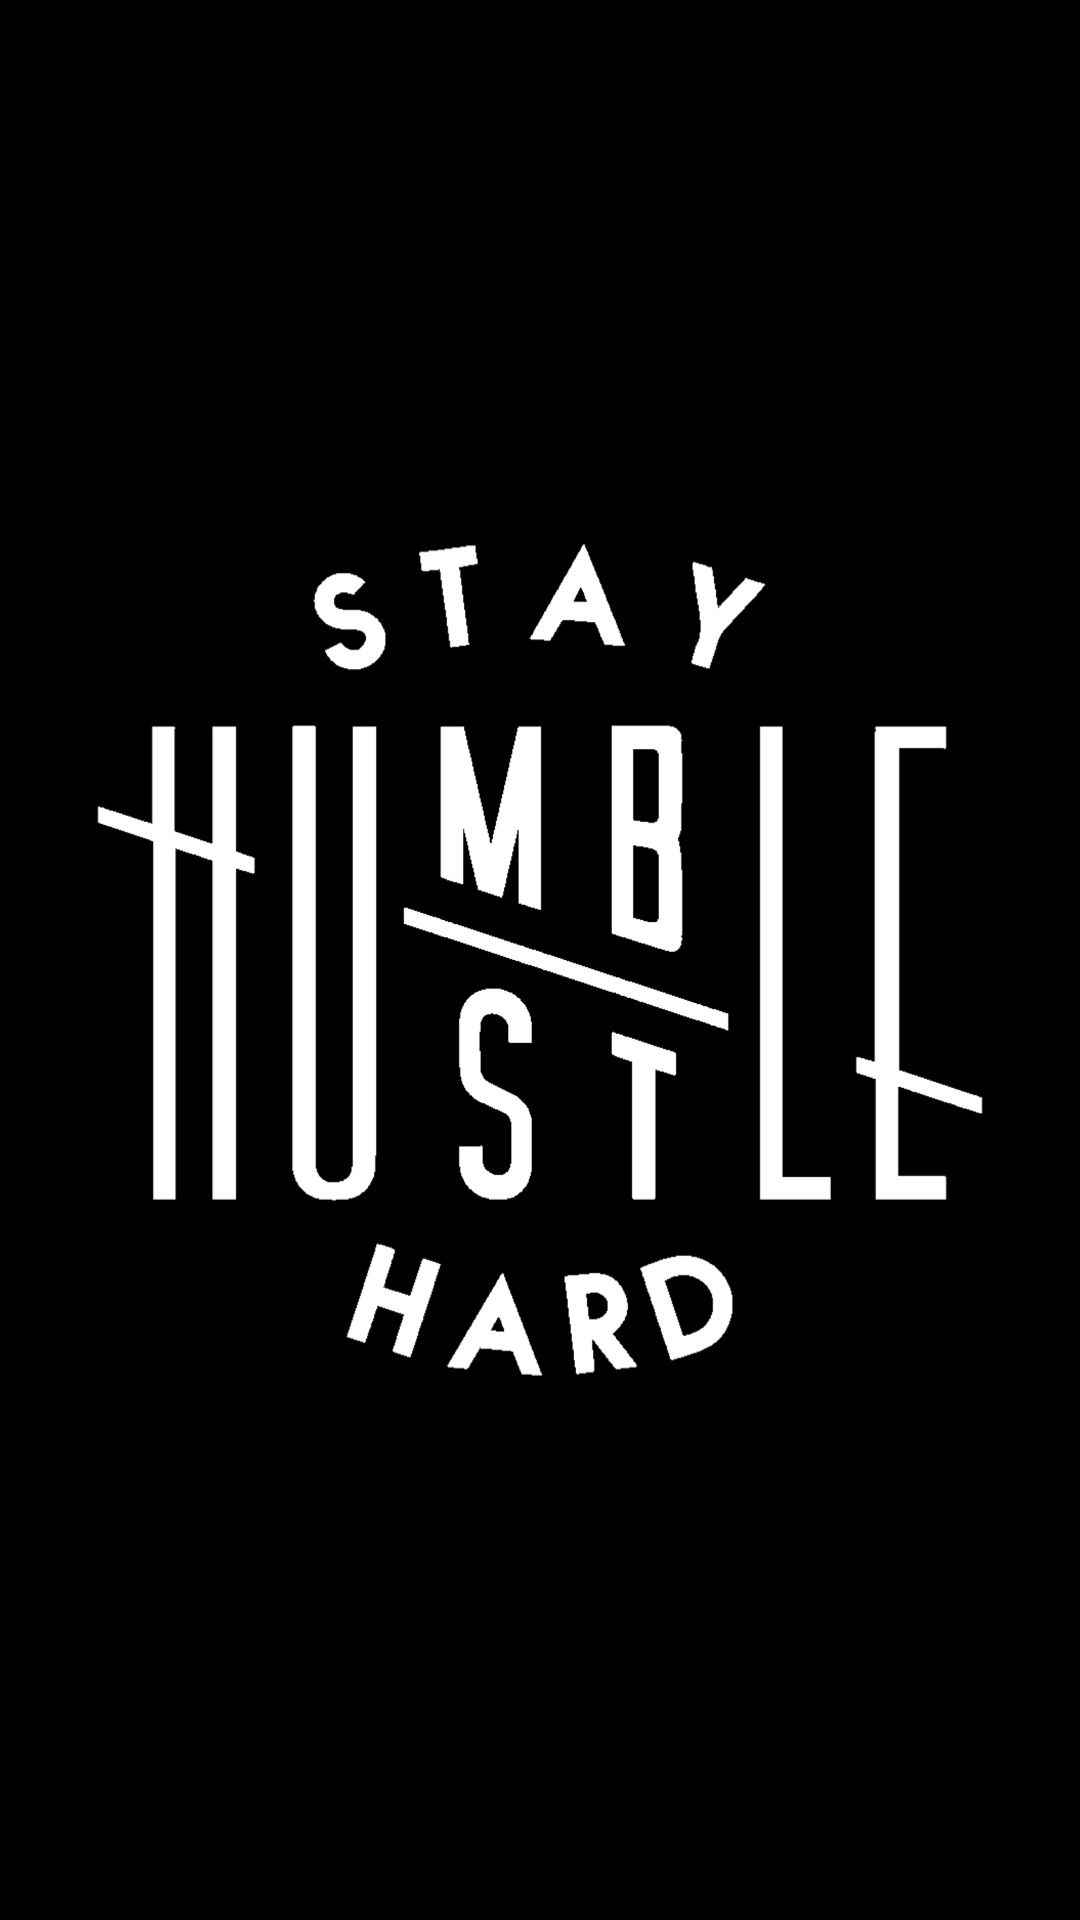 Stay Humble Hustle Hard. Stay humble hustle hard, Funny quote prints, Stay humble quotes